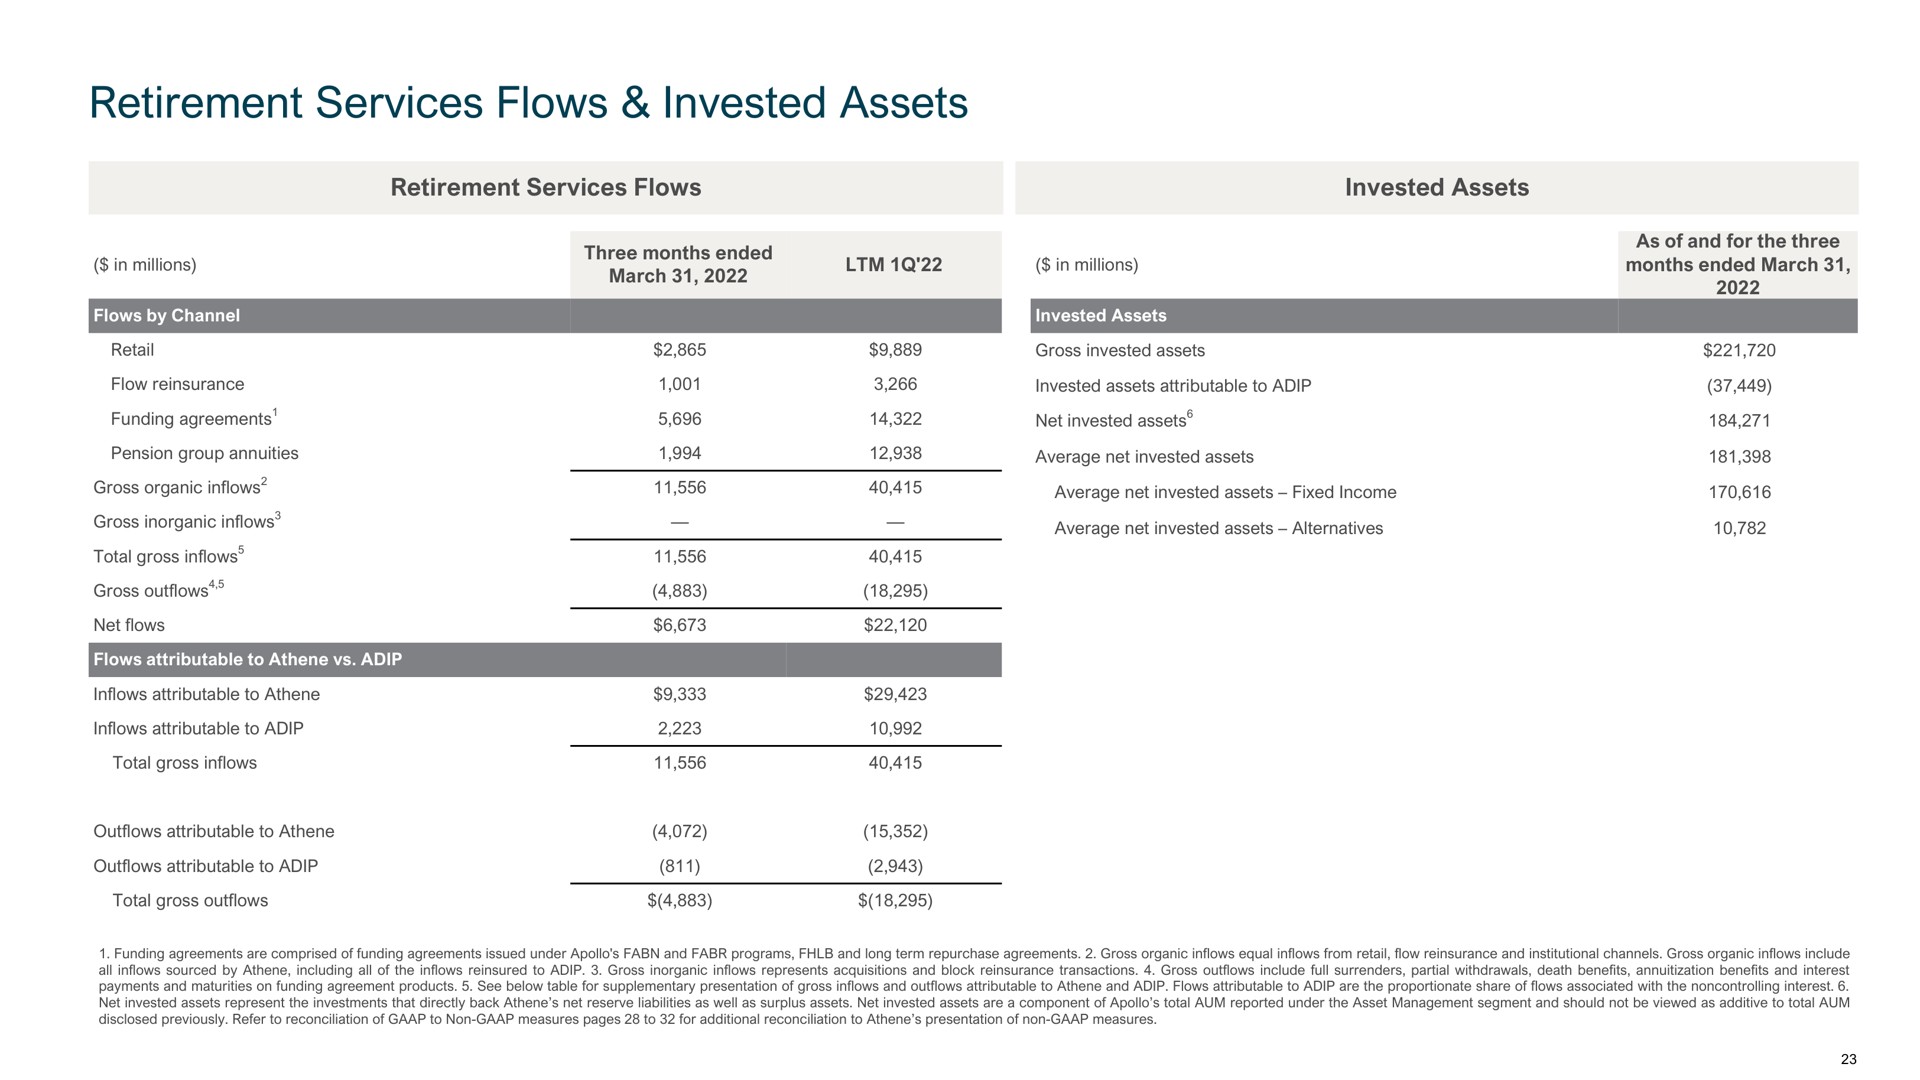 retirement services flows invested assets | Apollo Global Management